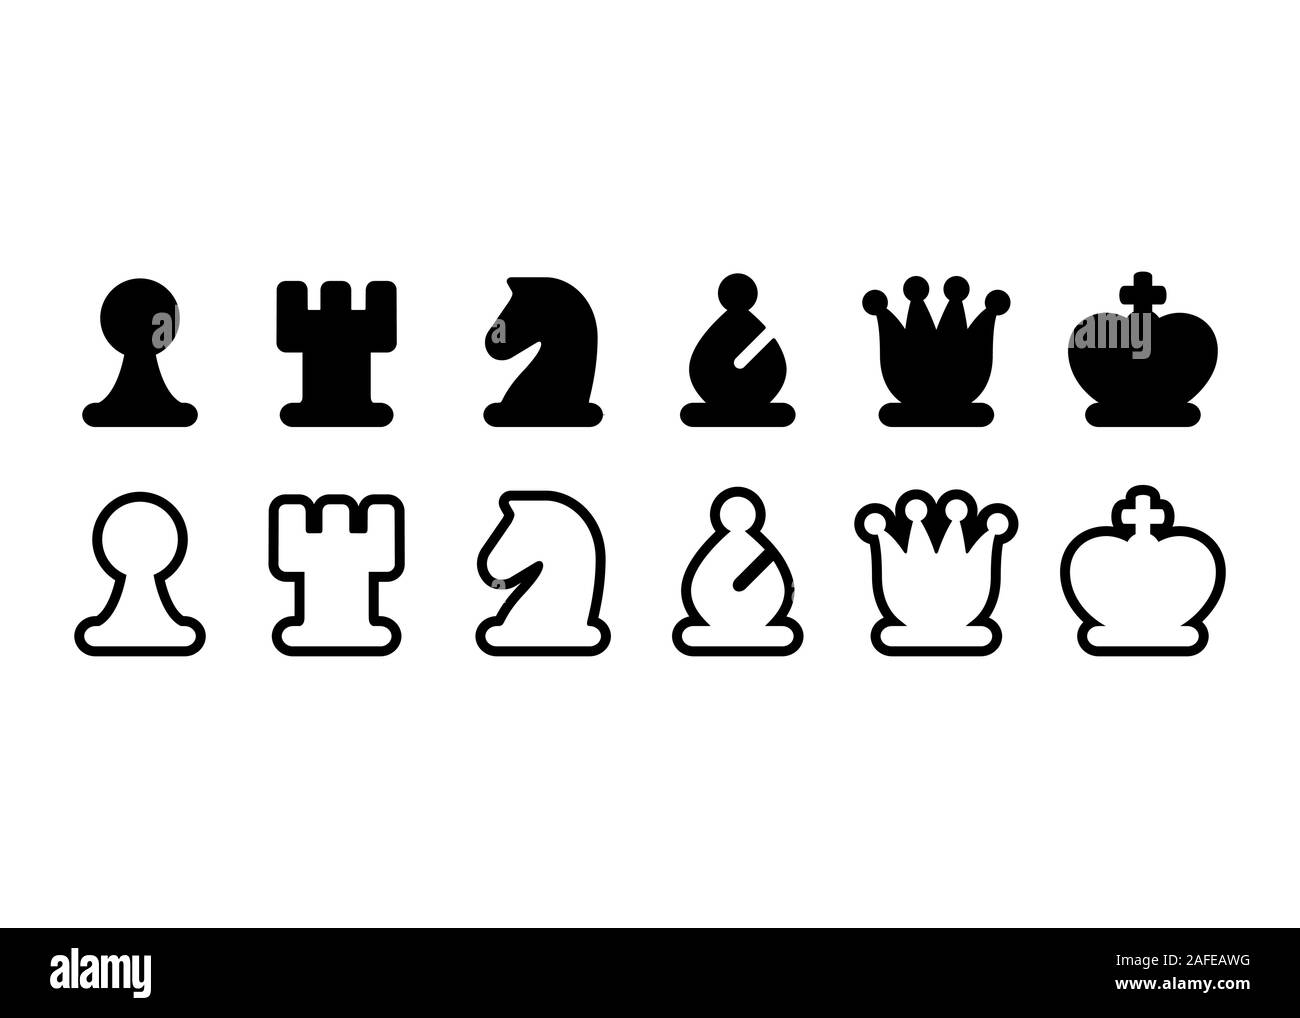 Chess pieces icon set, black and white chess figures. Simple stylized symbols, isolated vector illustration. Stock Vector